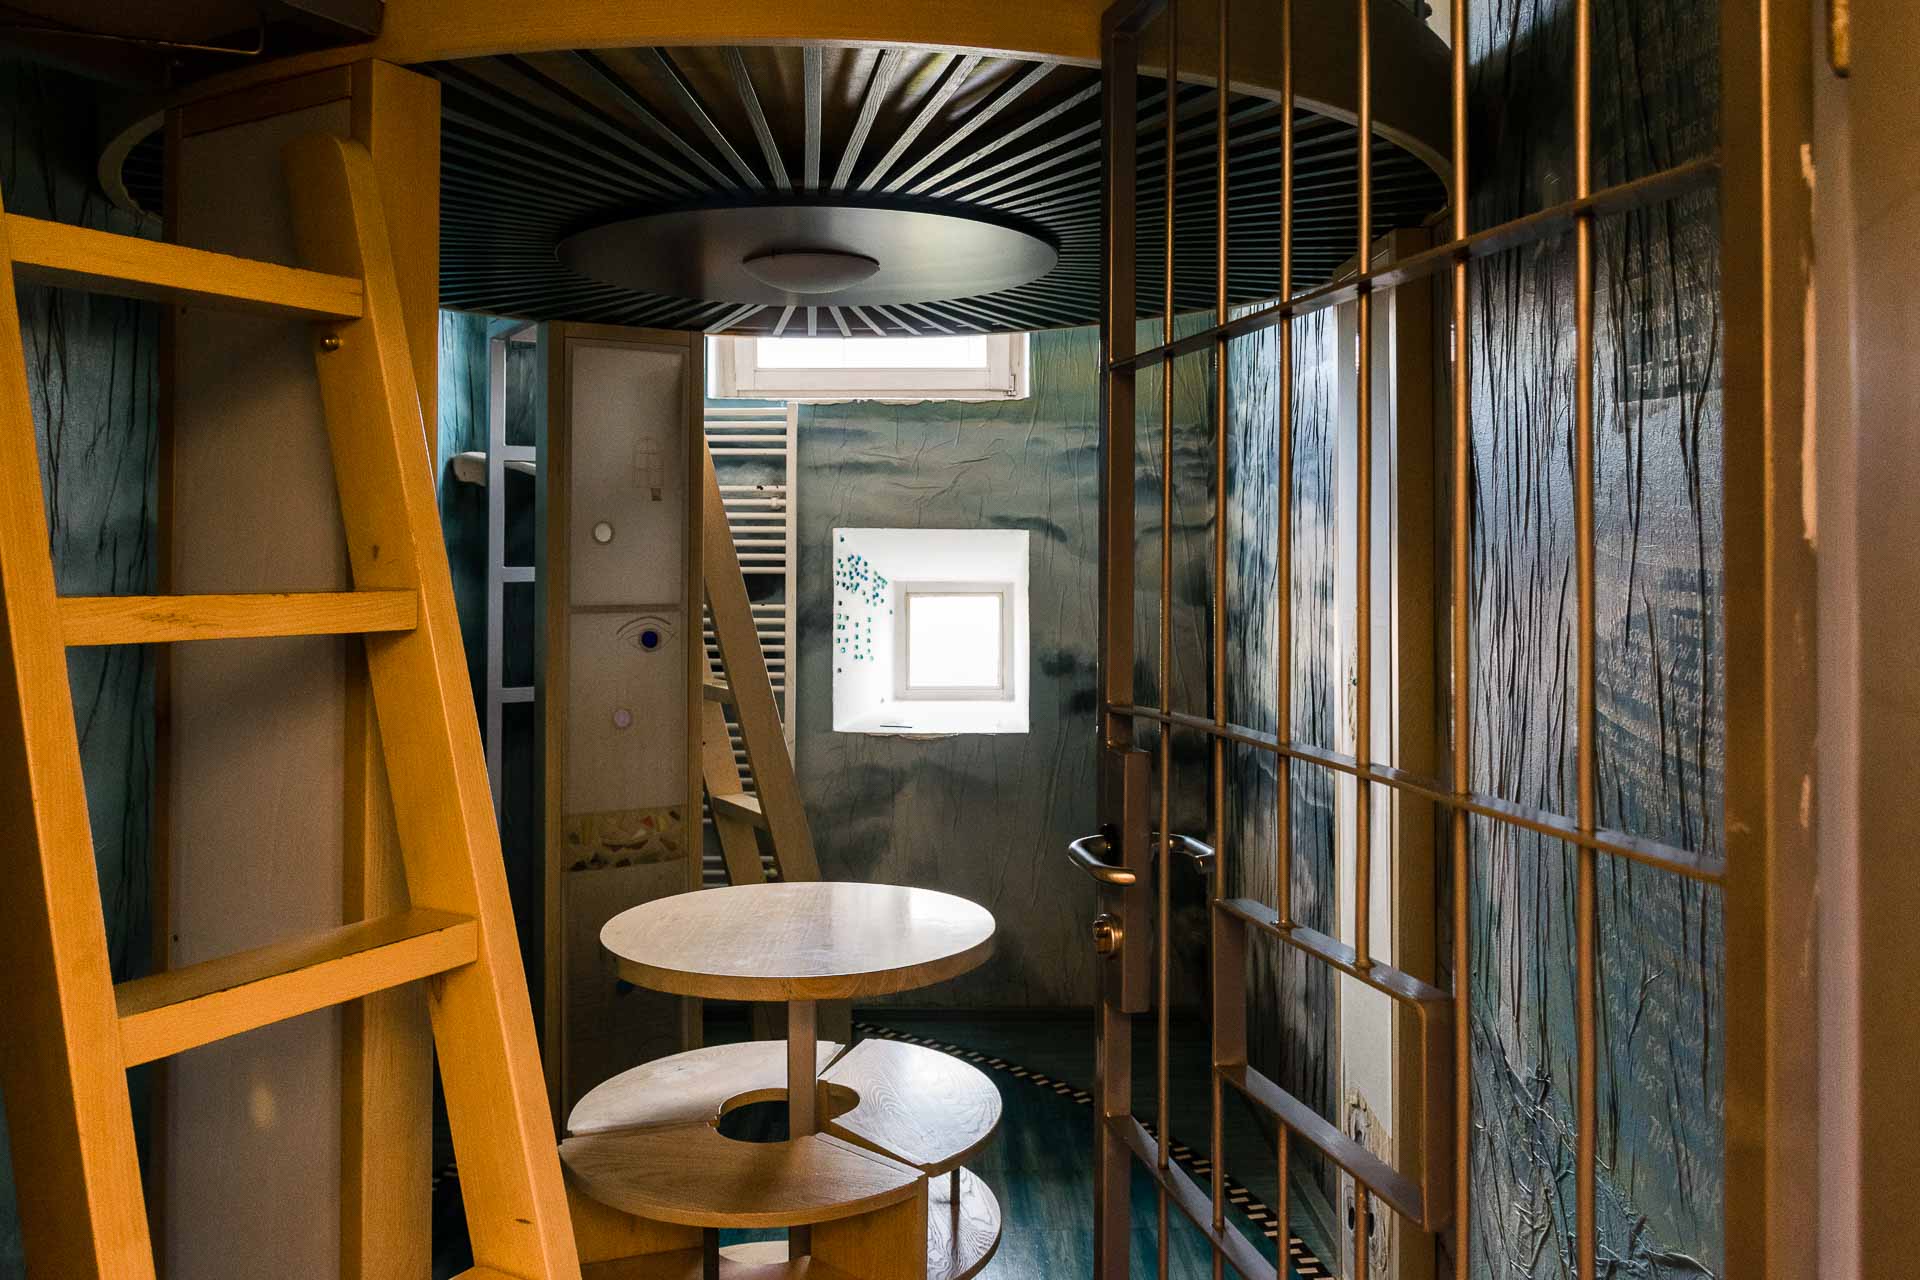 One of the rooms of Celica hostel that was transformed from a prison cell